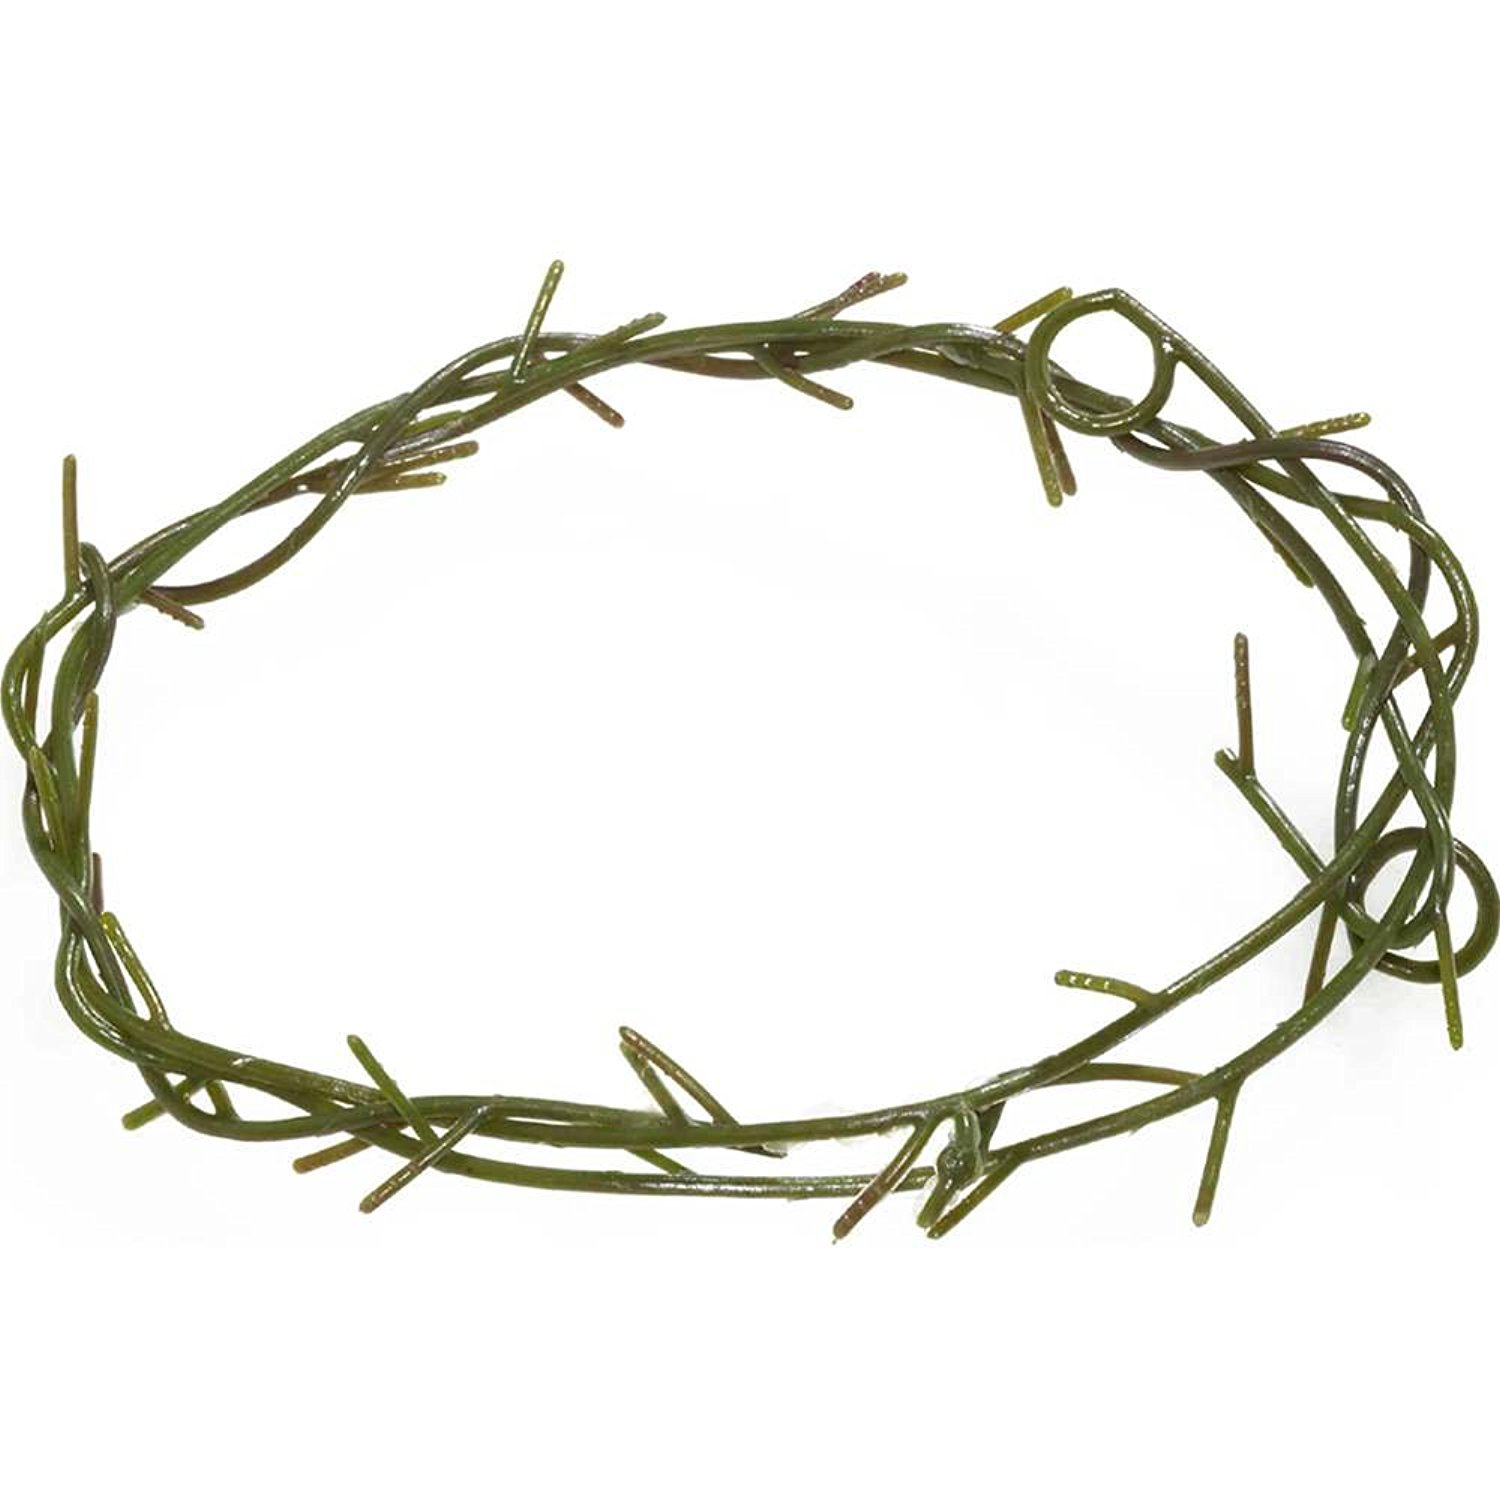 Amazon.com: Jesus Thorn Crown Costume Accessory, Brown, One Size ...